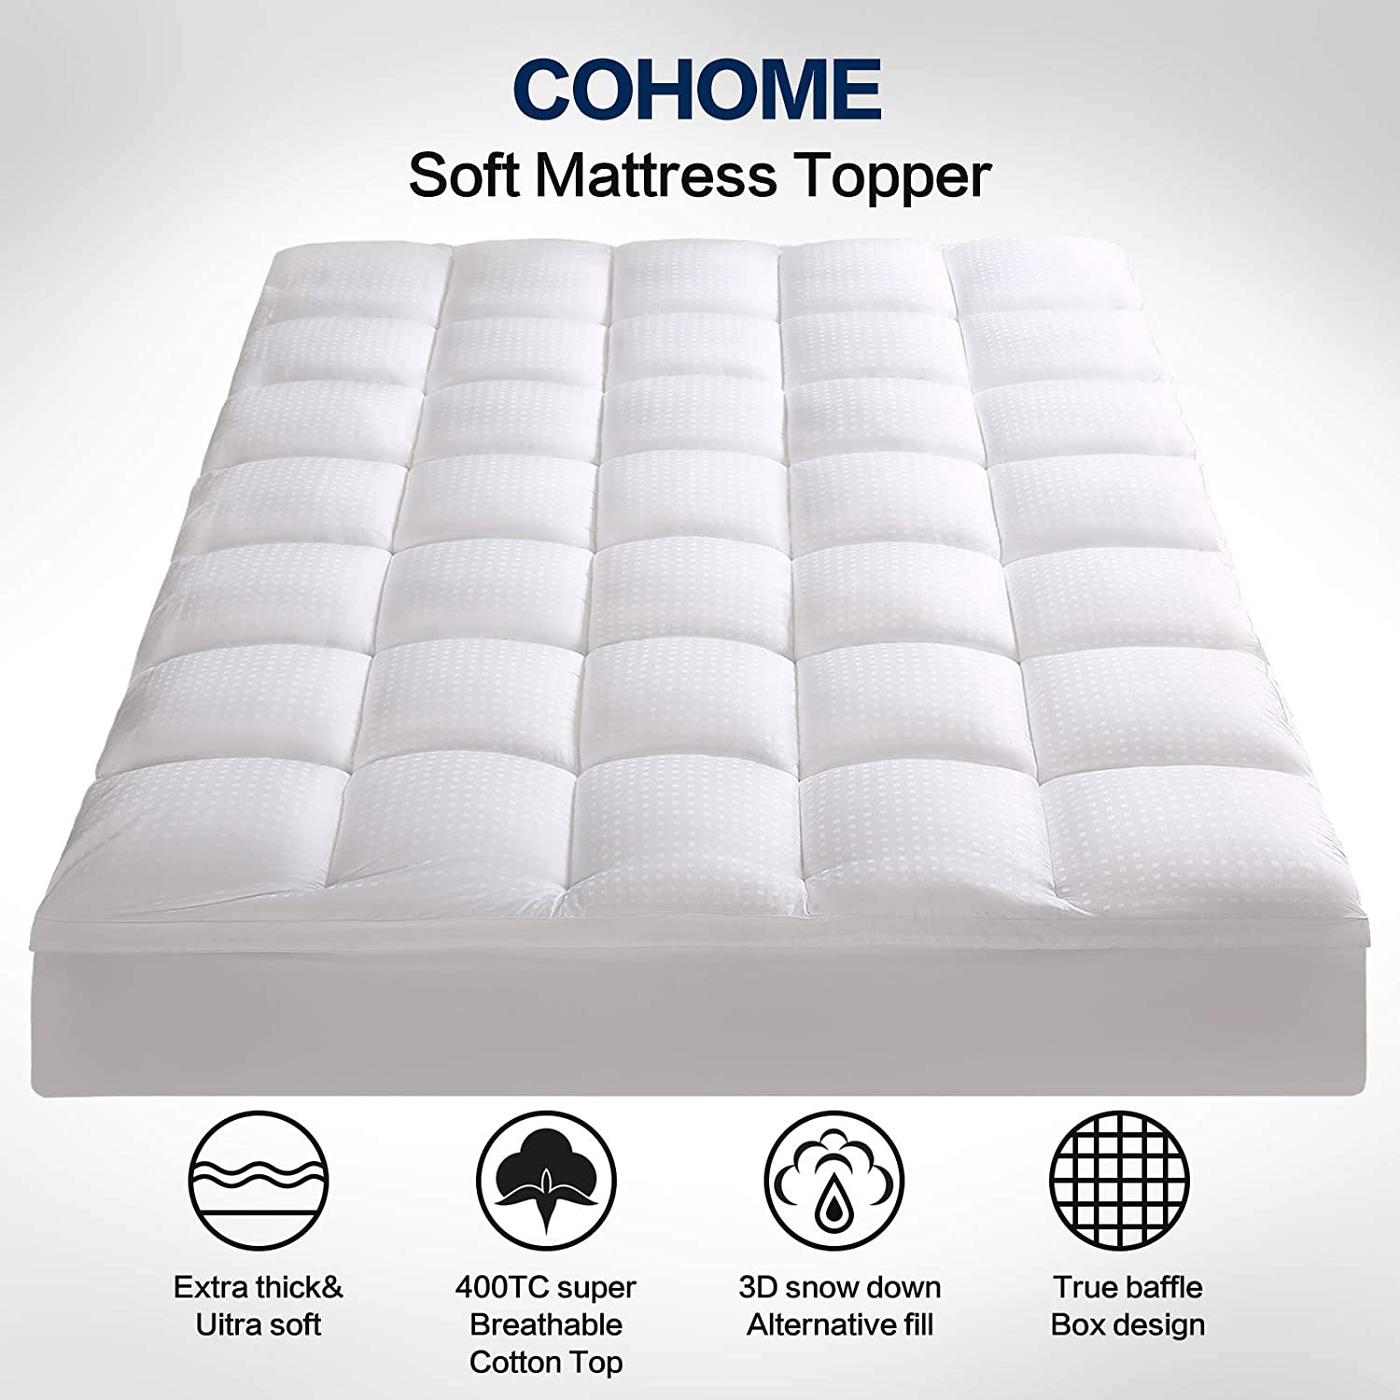 COHOME King Size Mattress Topper Extra Thick Cooling Mattress Pad 400TC Cotton Top Plush Down Alternative Fill Pillow Top Mattress Cover with 8-21 Inch Deep Pocket (78x80 Inches, White-Classic)